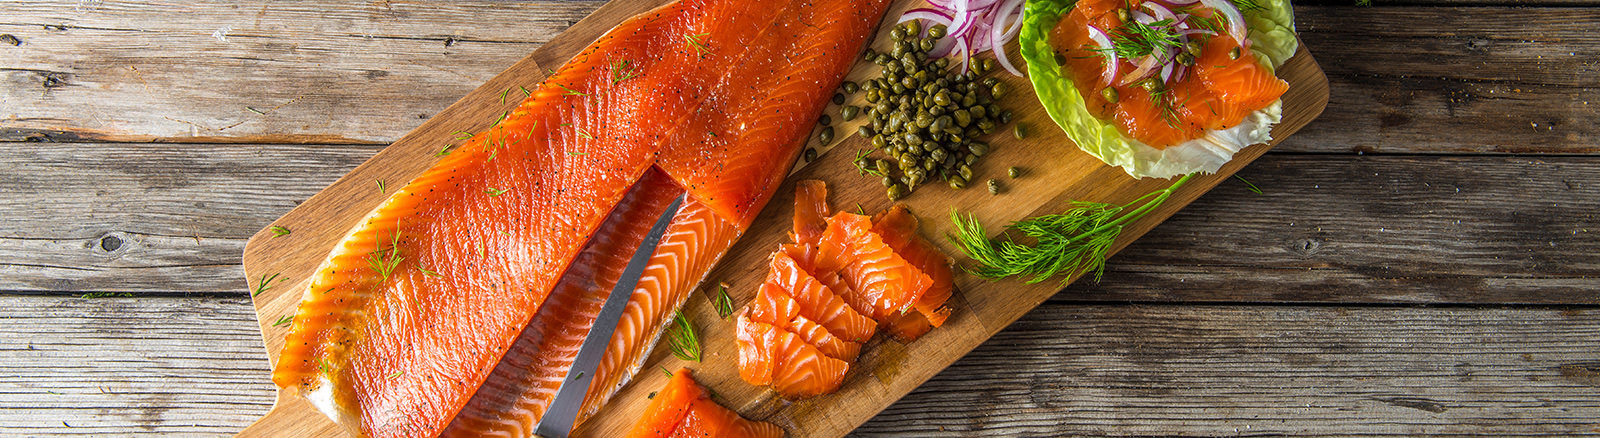 Traeger Smoked Salmon
 Traeger Wood Fire Grill Recipe Cold Smoked Salmon